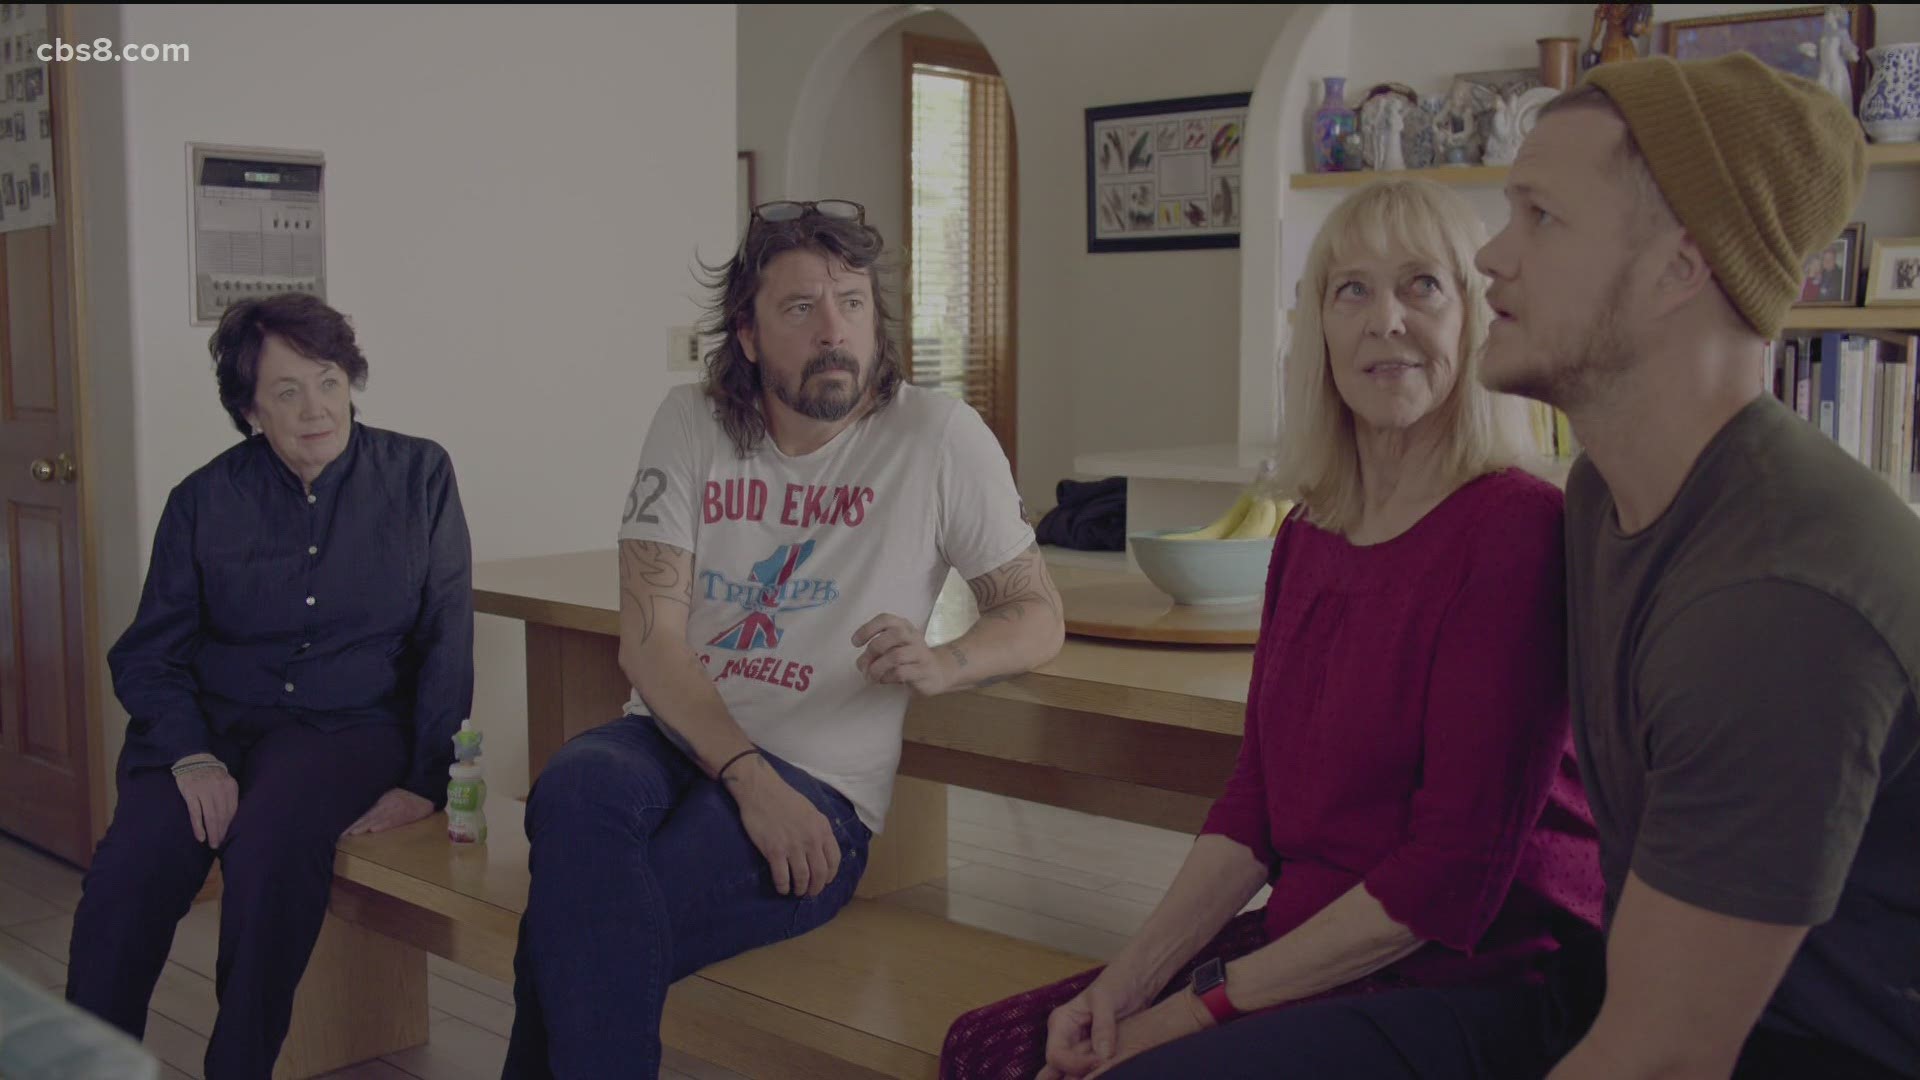 Dave Grohl and his mother Virginia's new six-part show "From Cradle to Stage" starts Thursday on Paramount Plus with Dan Reynolds and his mom Christine.